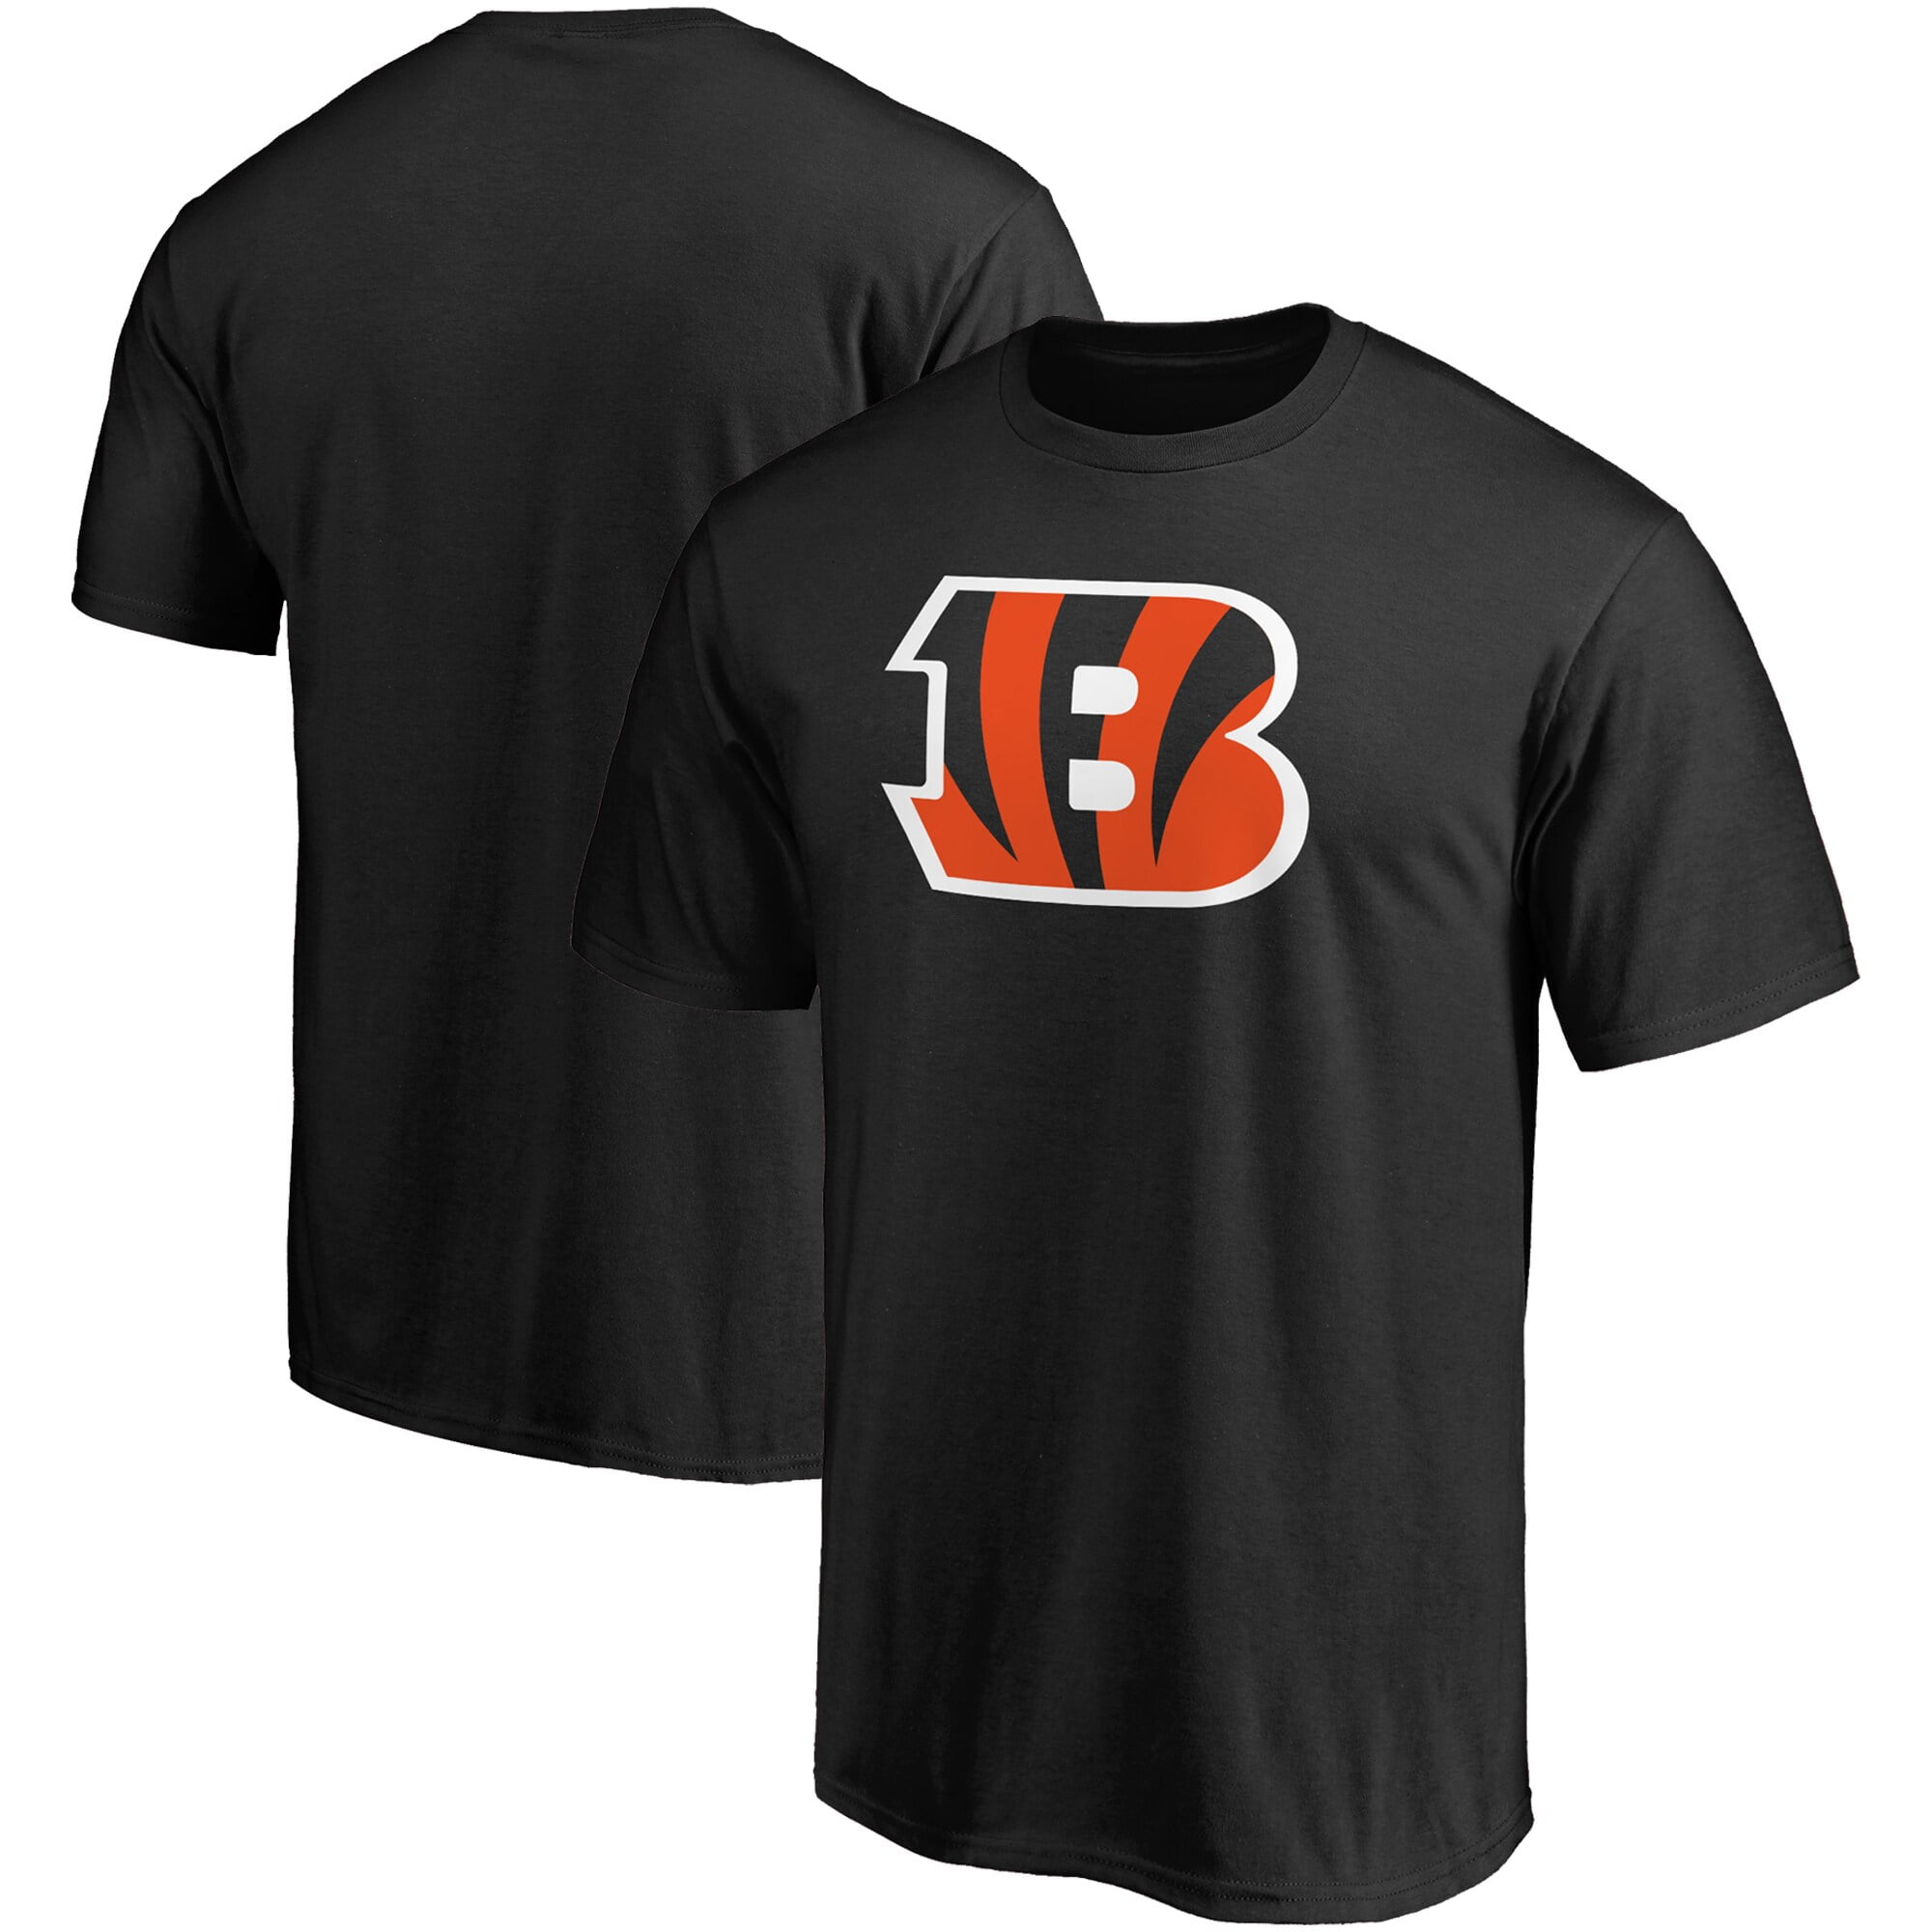 bengals shirts on sale